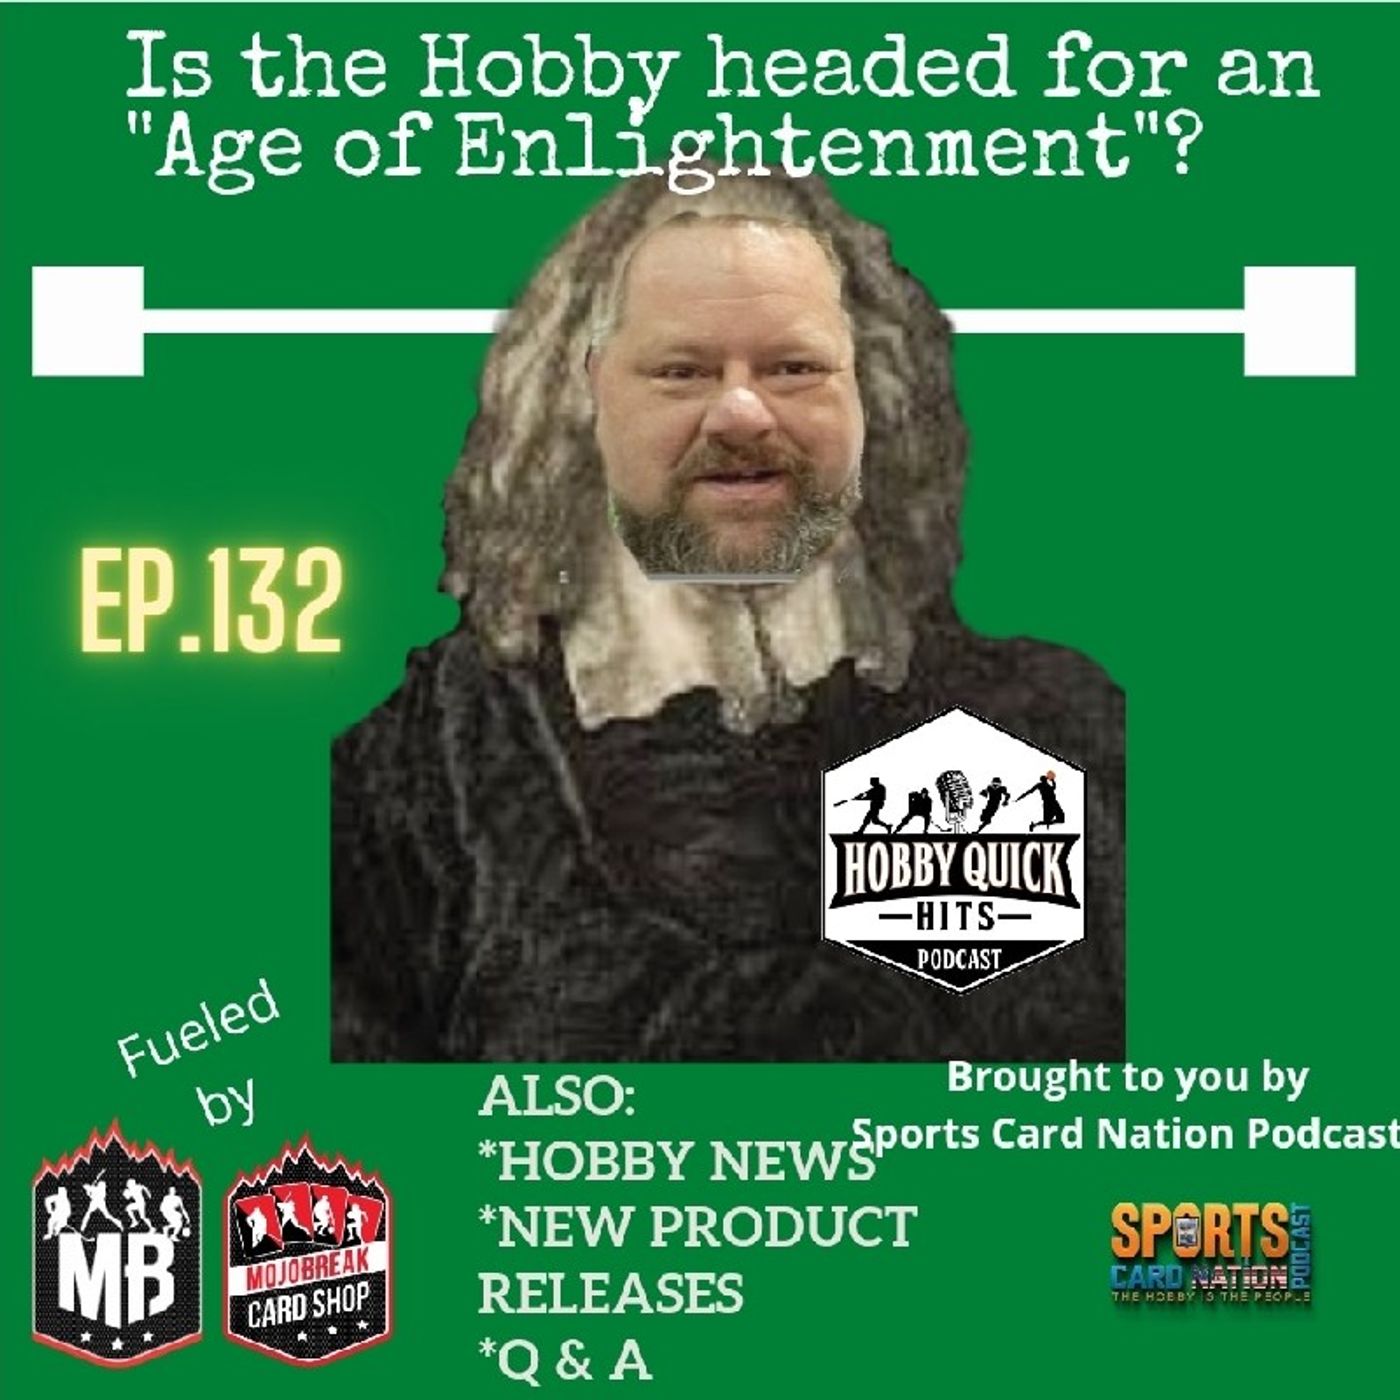 Hobby Quick Hits Ep.132 Is the Hobby headed for an "Age of Enlightenment"?